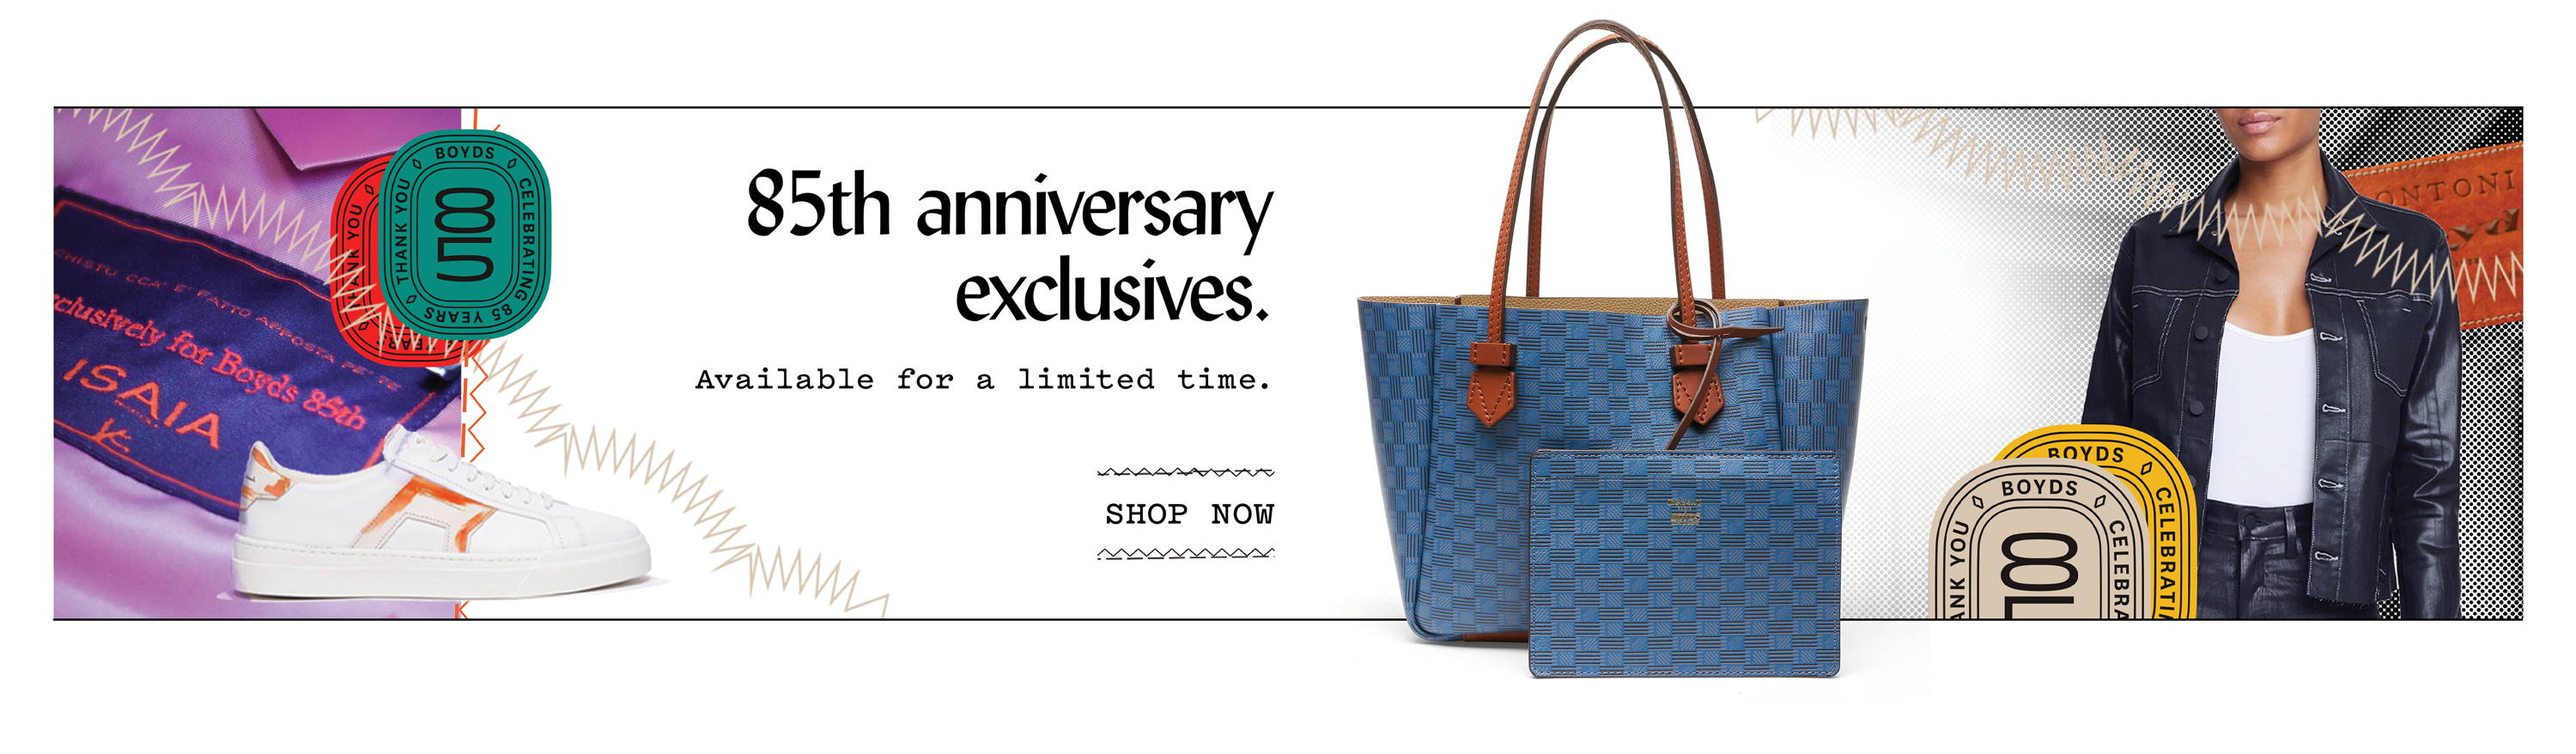 85th Anniversary Exclusives. Available for a limited time.